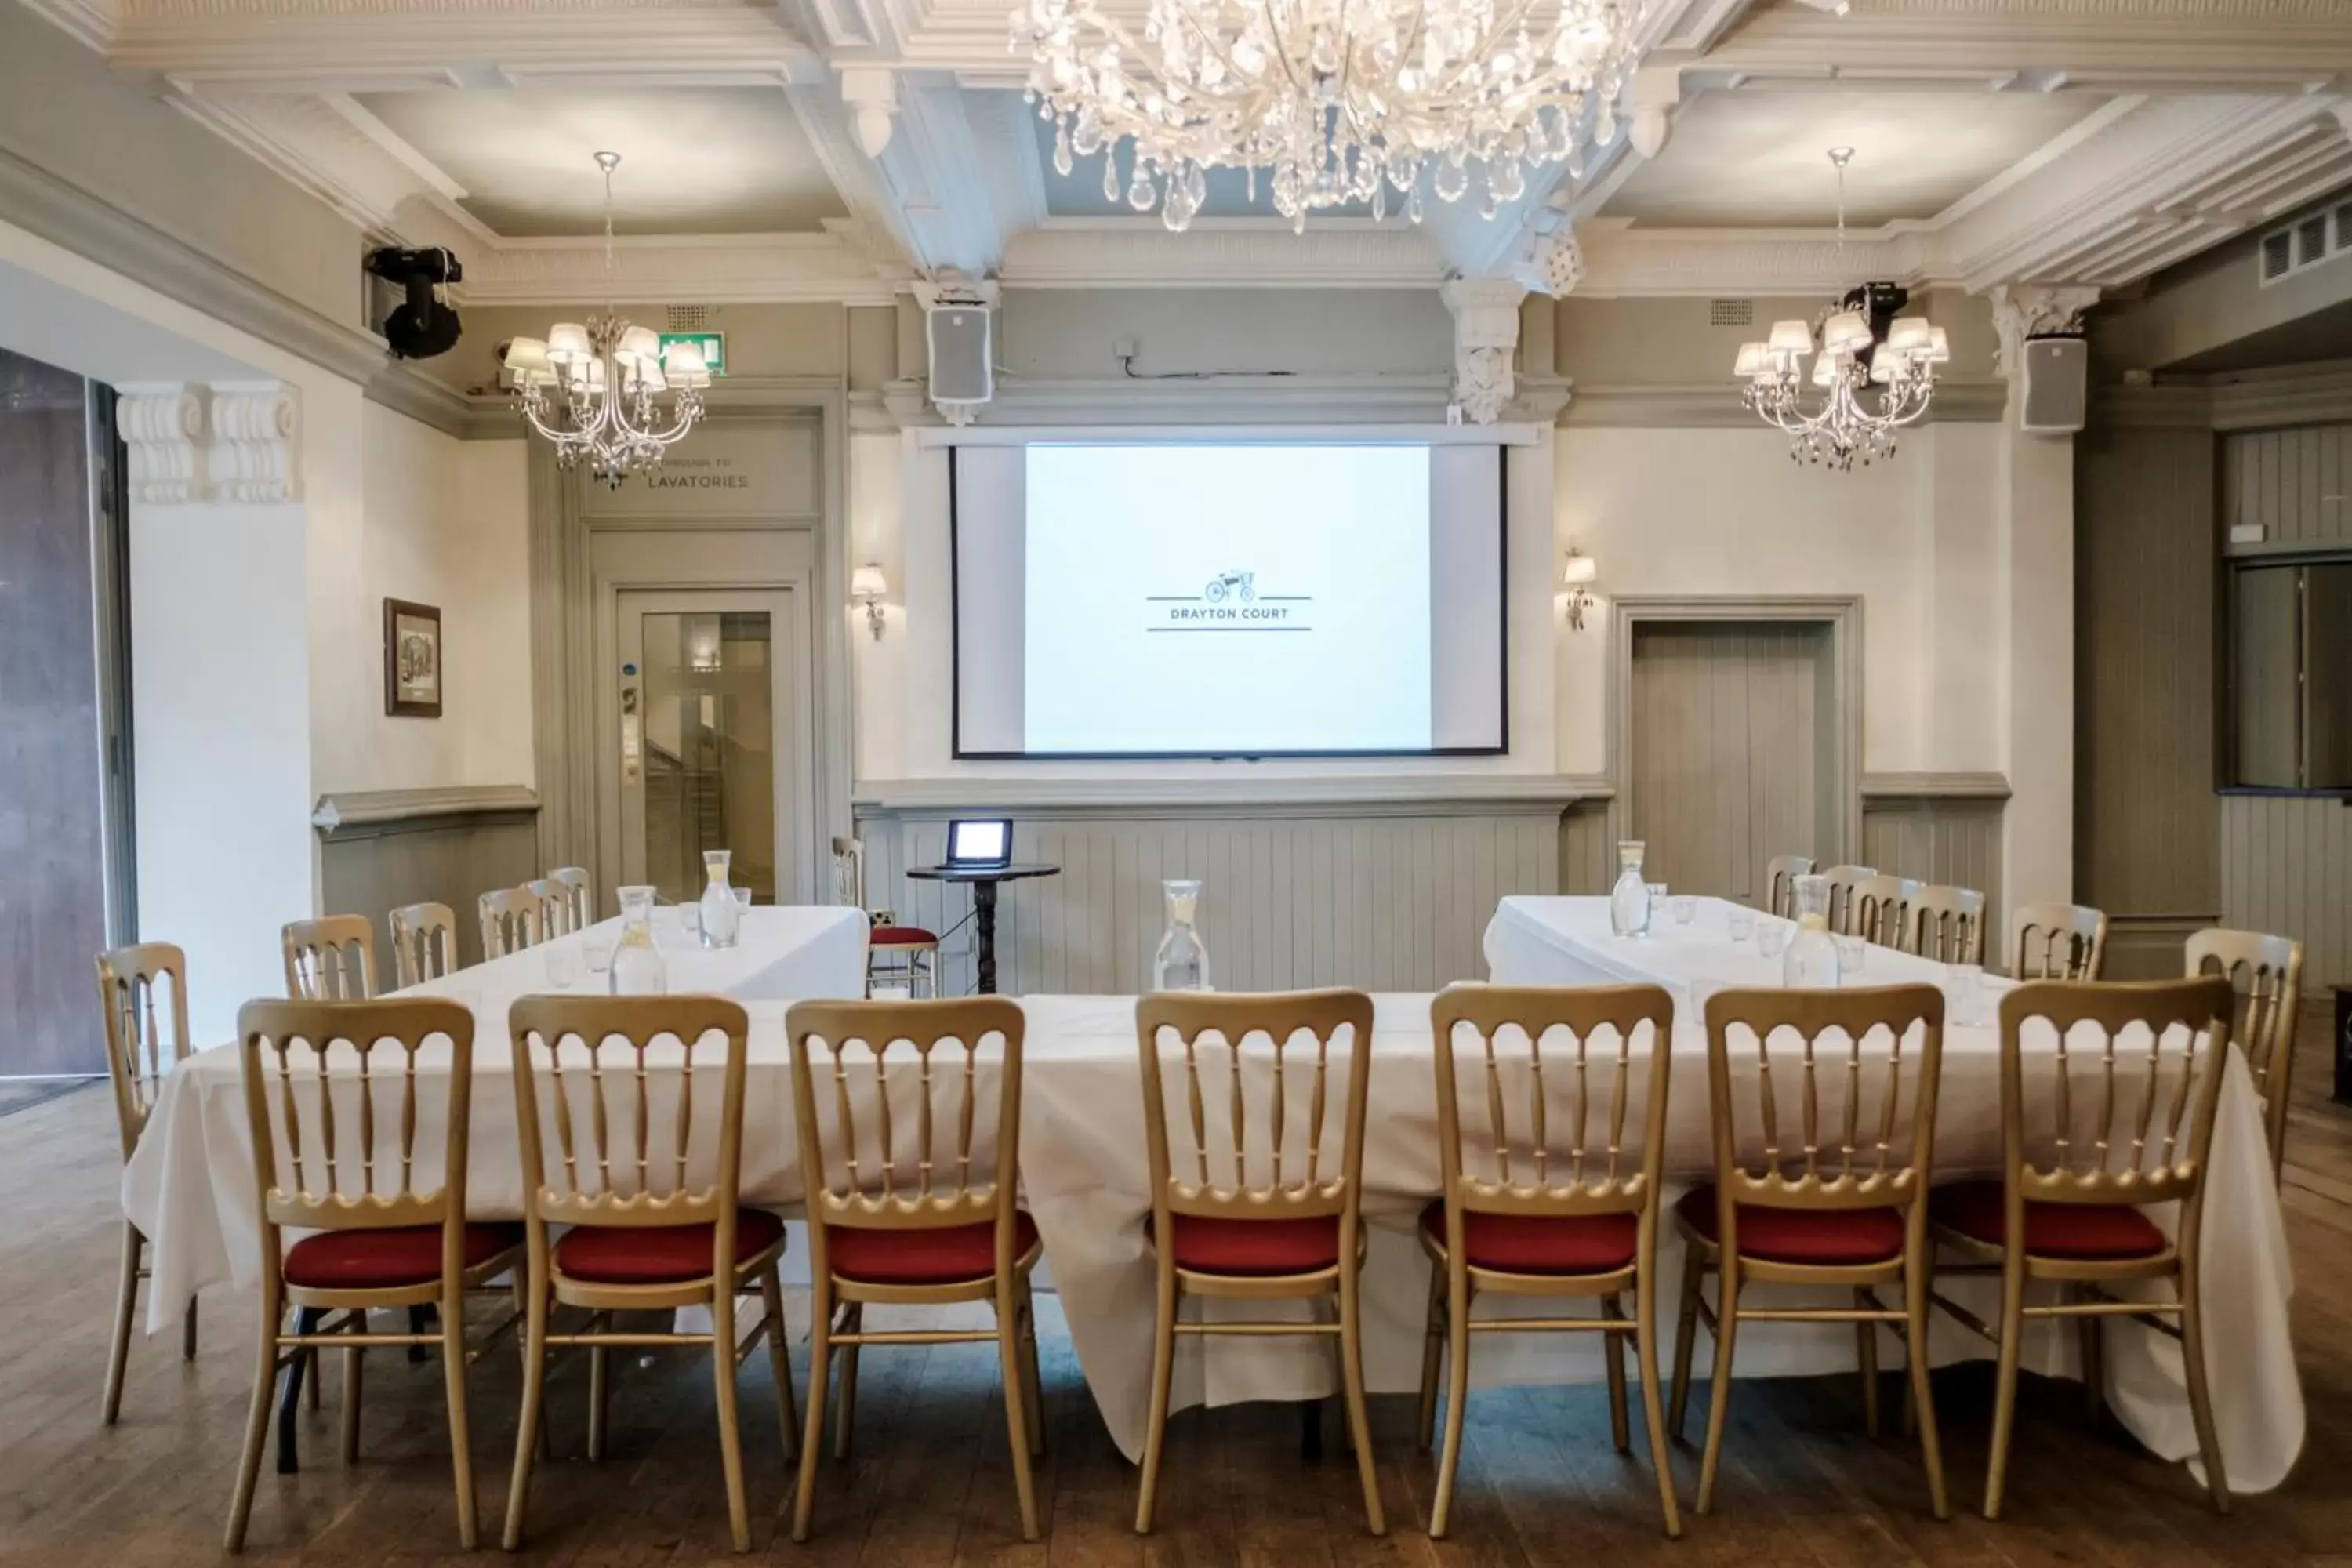 Business facilities in The Drayton Court Hotel